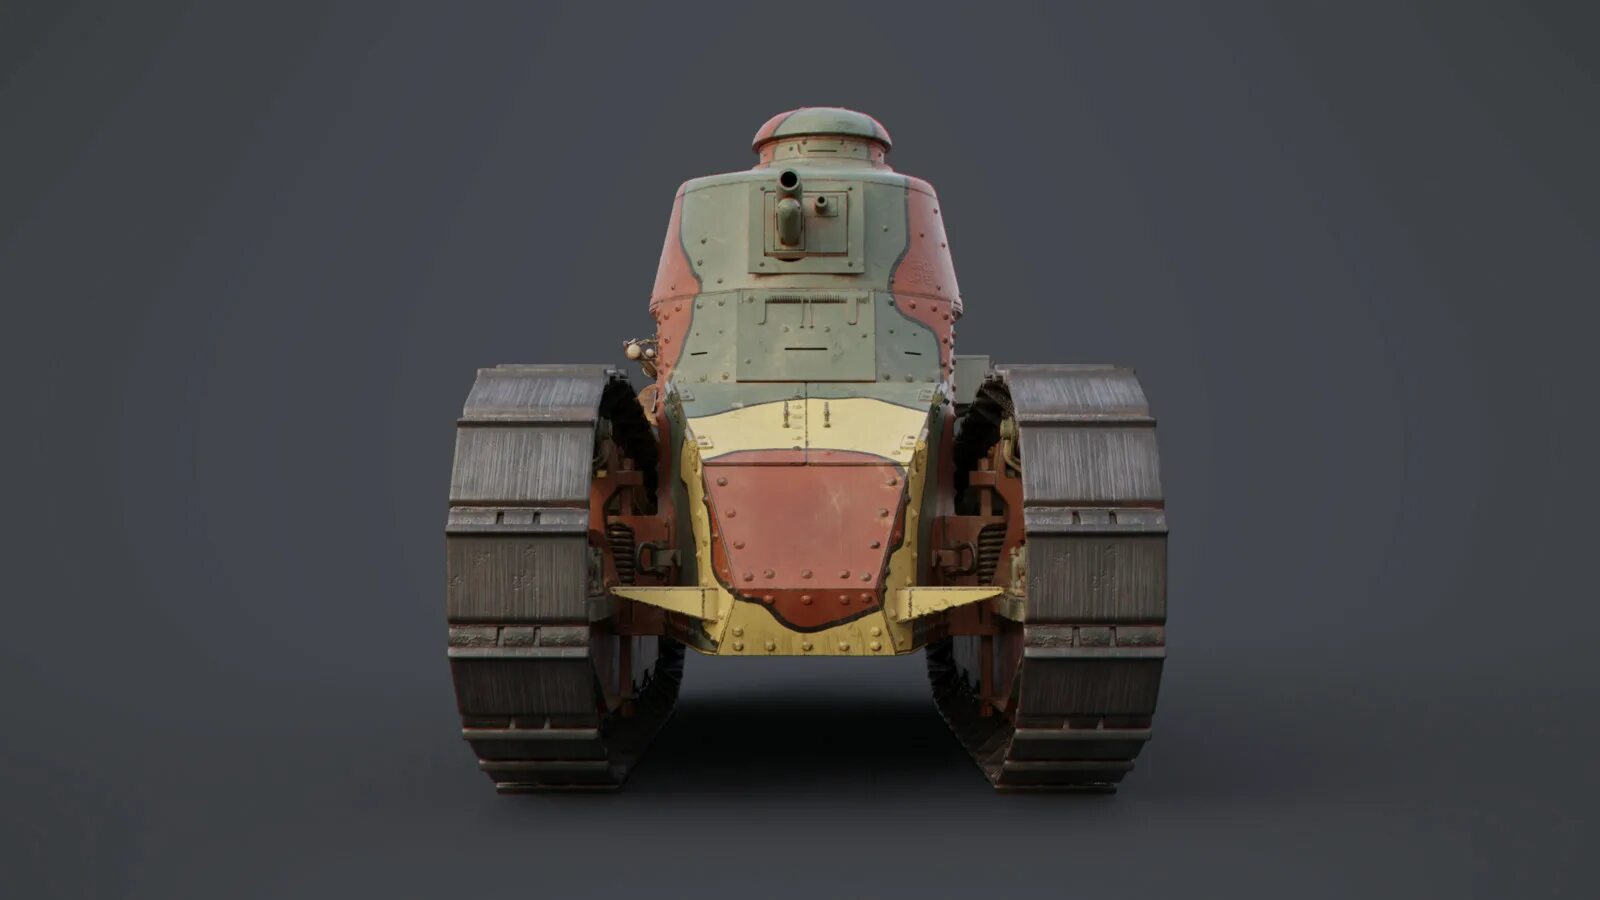 Renault g. Рено ФТ 17. Танк Рено ft-17. Renault ft 1917. Гусеница танка Рено фт17.